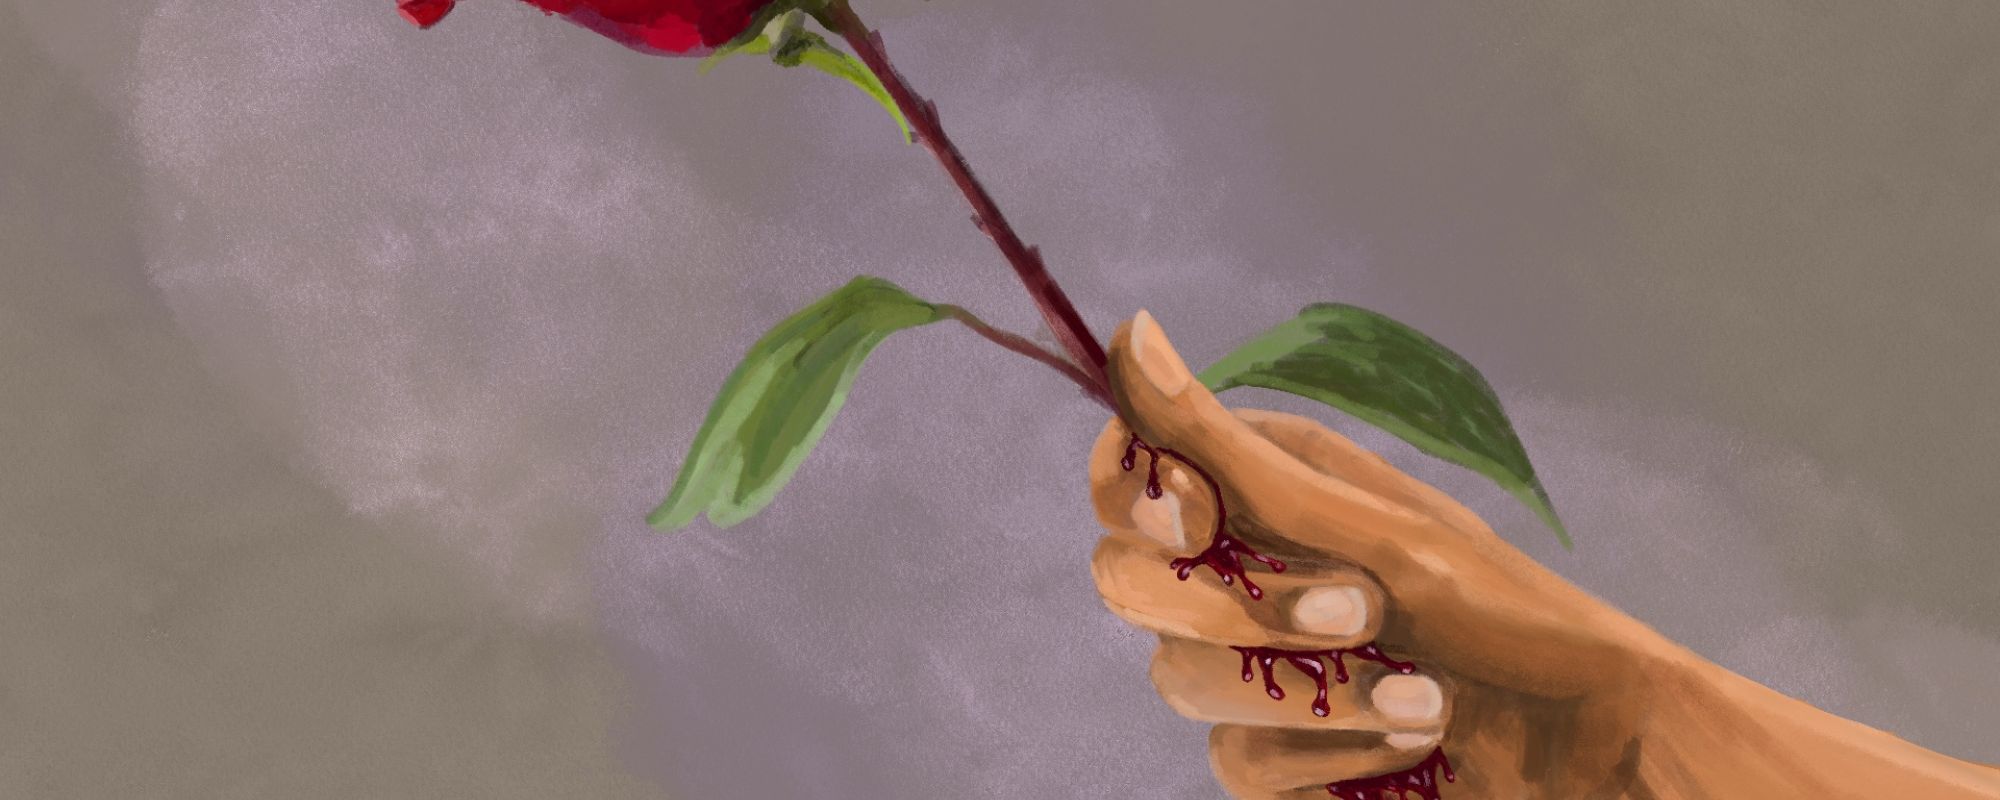 hand extended with red rose in palm and blood dripping from grip